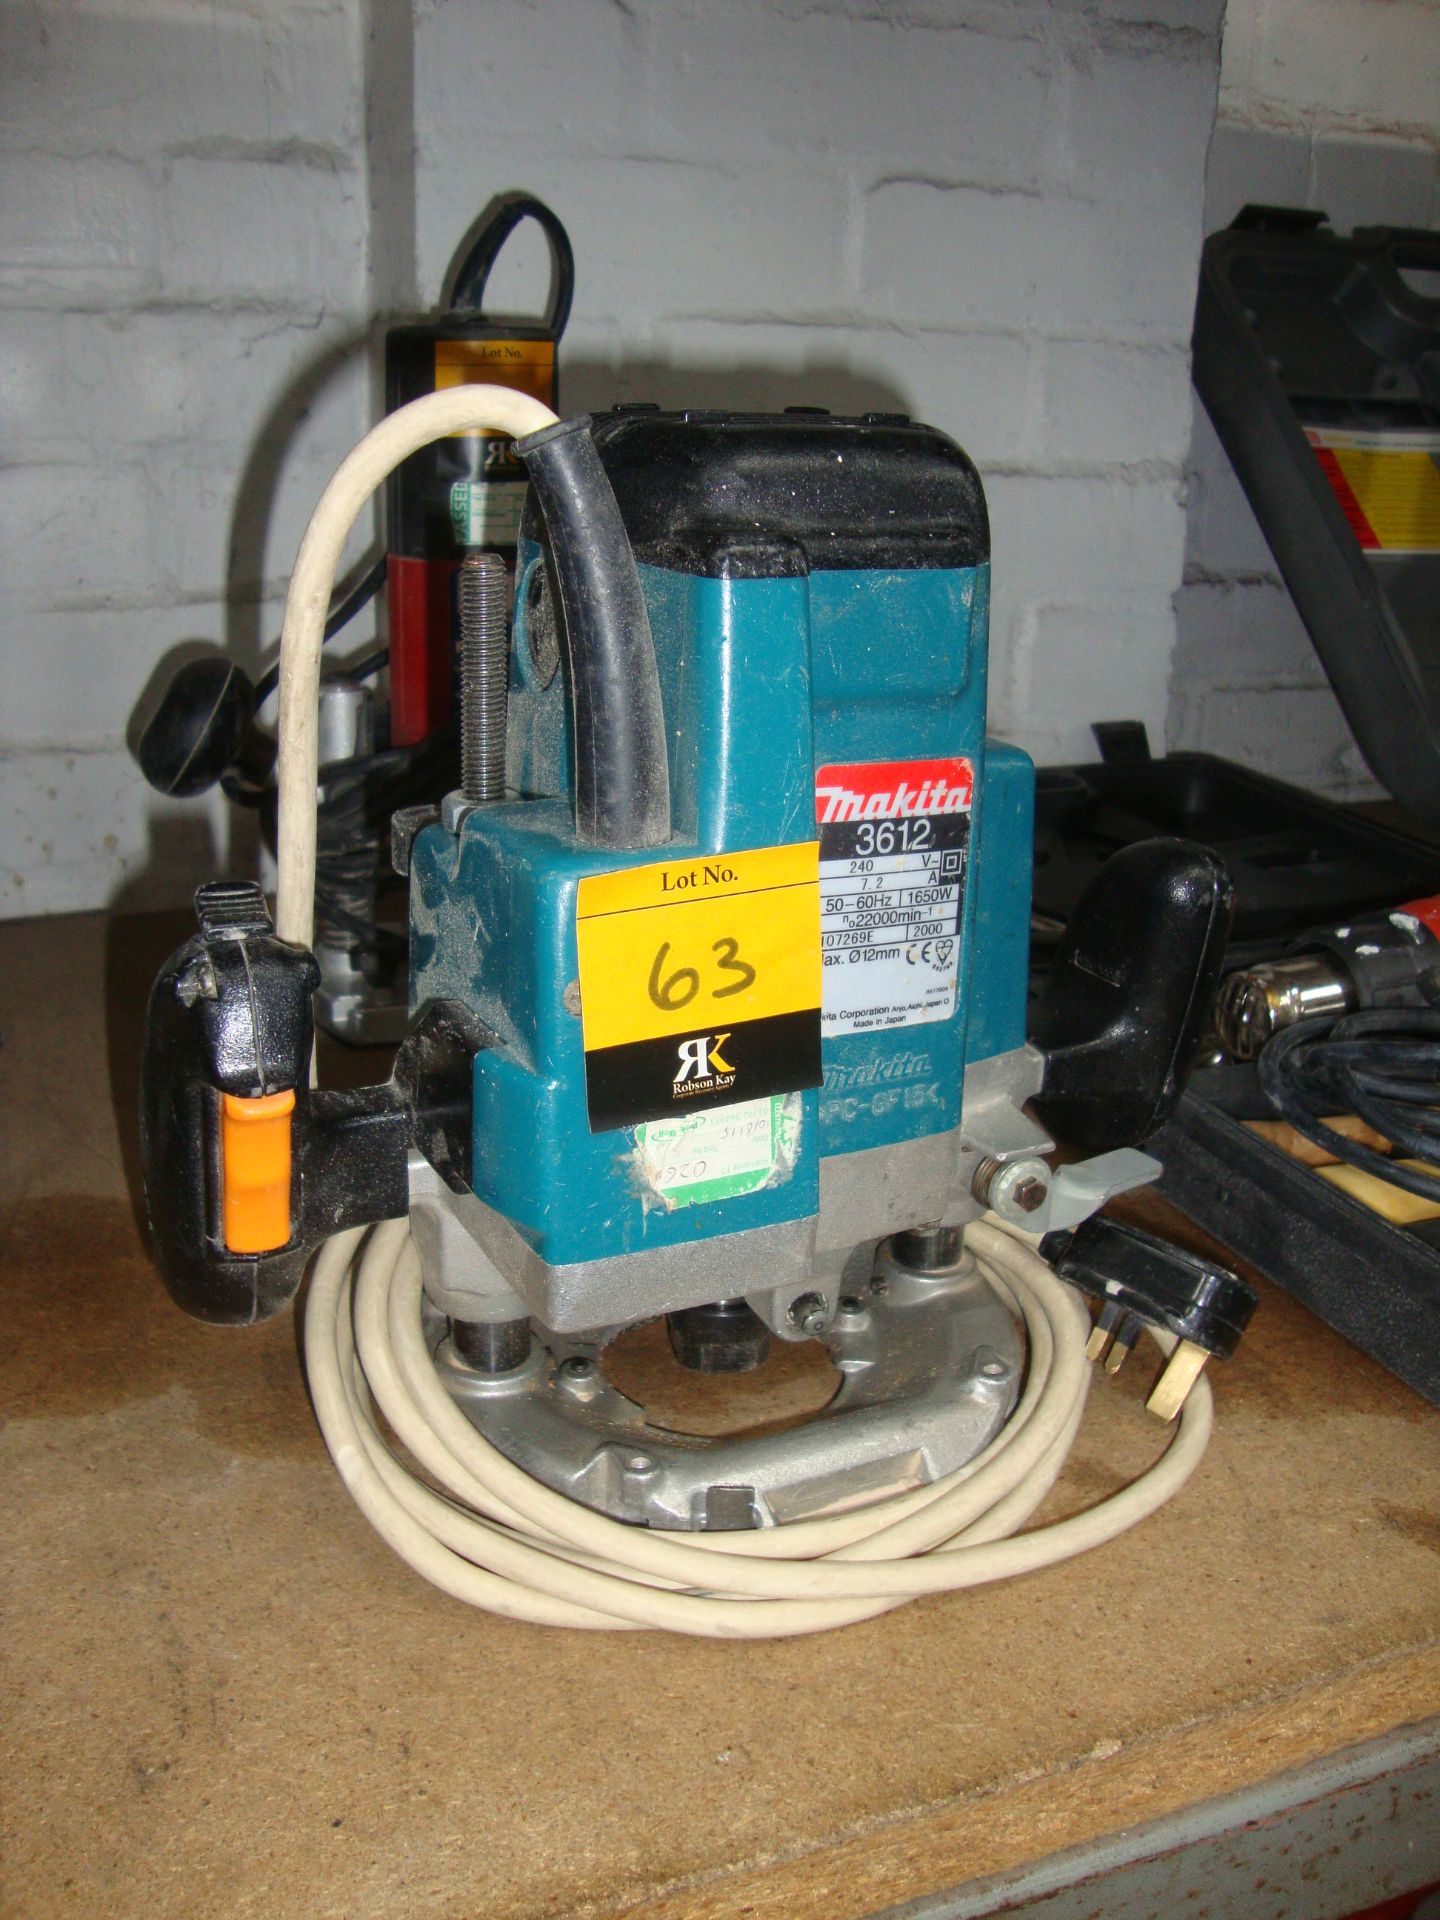 Makita model 3612 handheld electric plunge router IMPORTANT: Please remember goods successfully